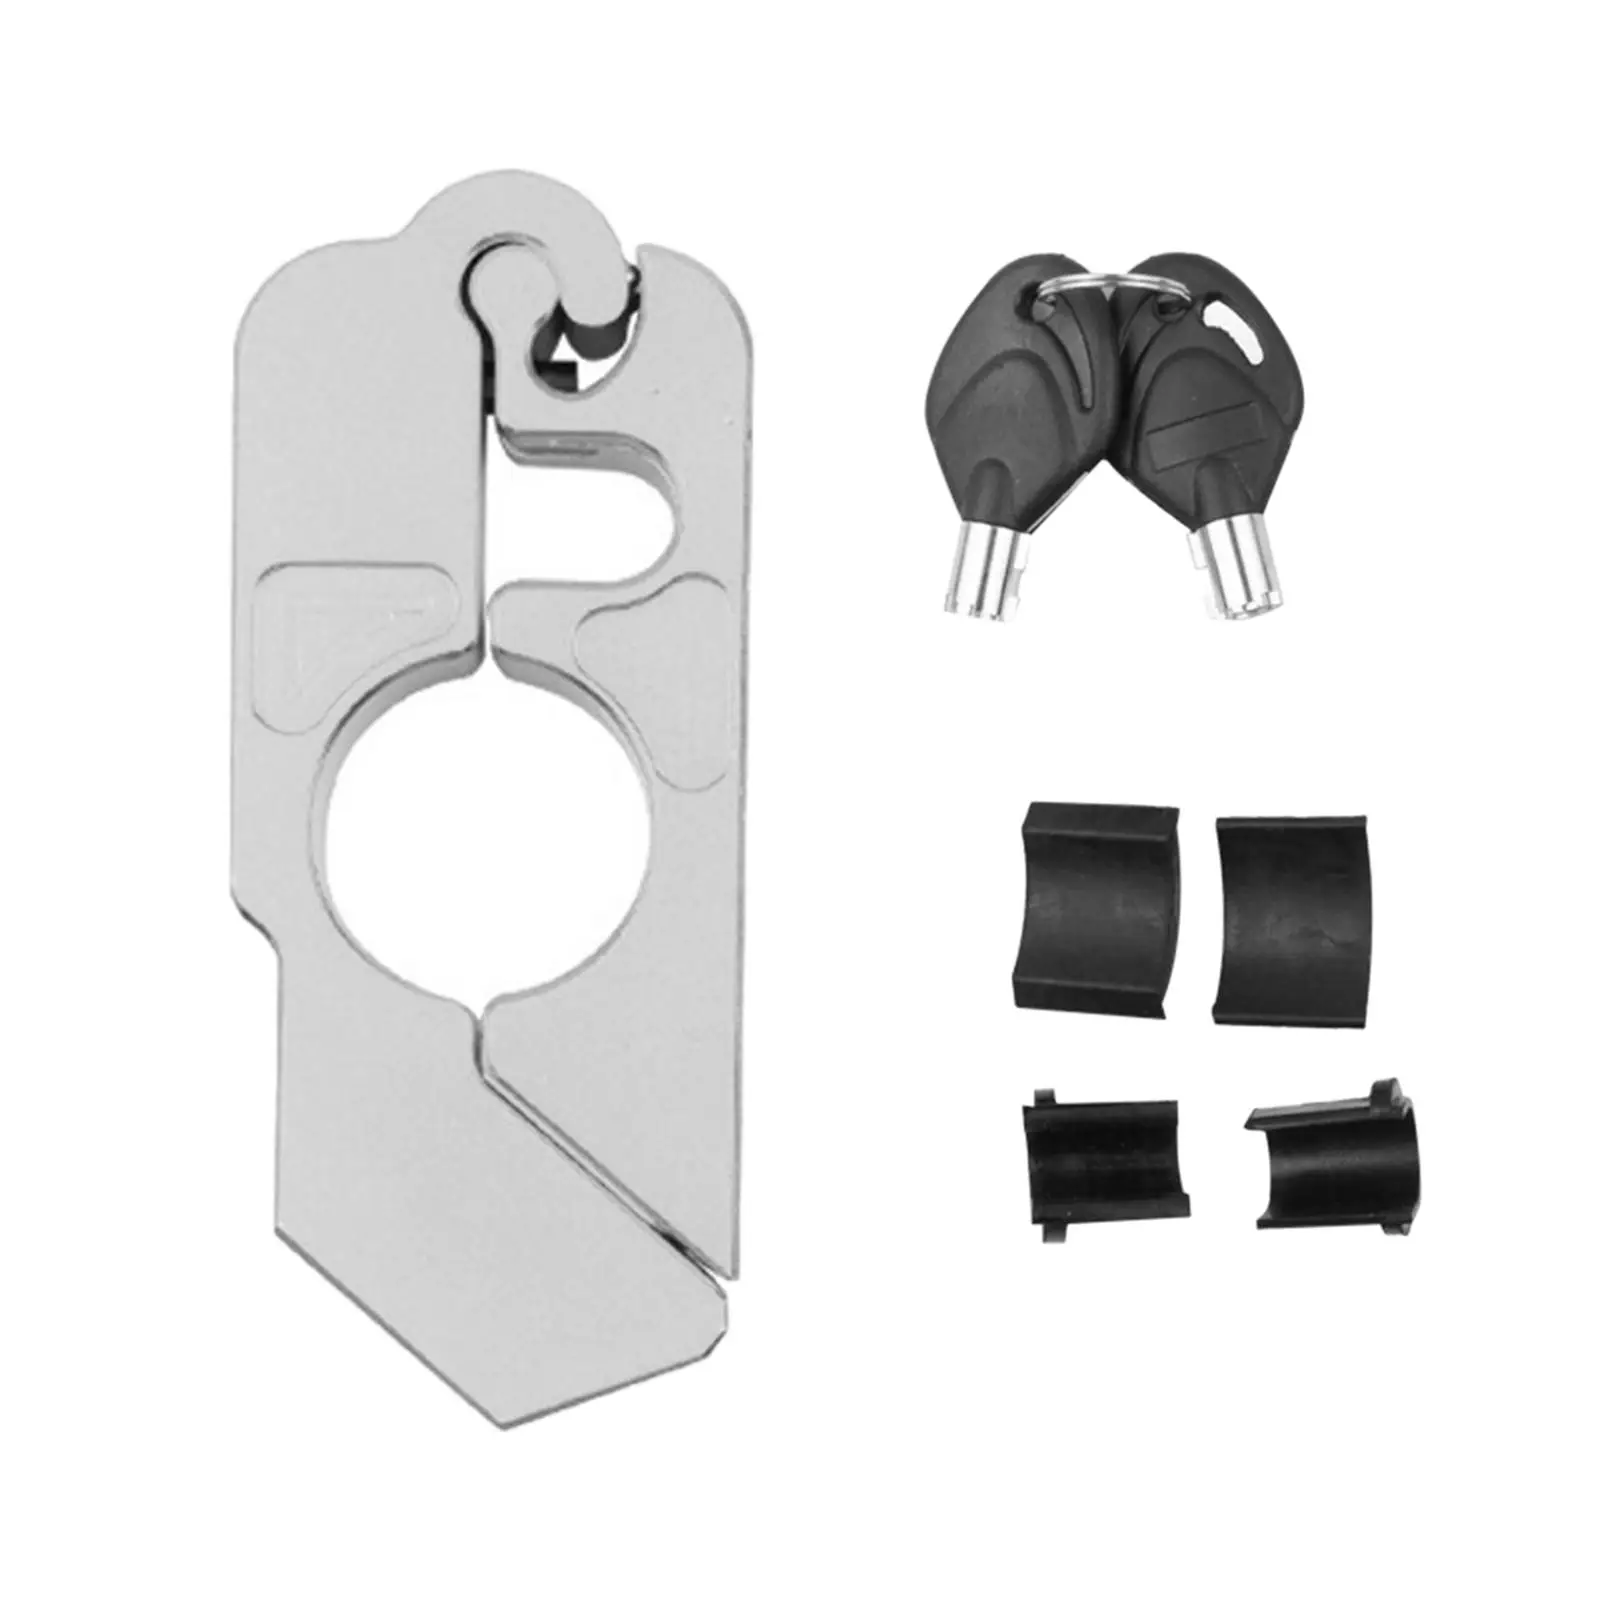 Duty Motorcycle Lock Throttle Lock for protection Secure Your Motorcycle